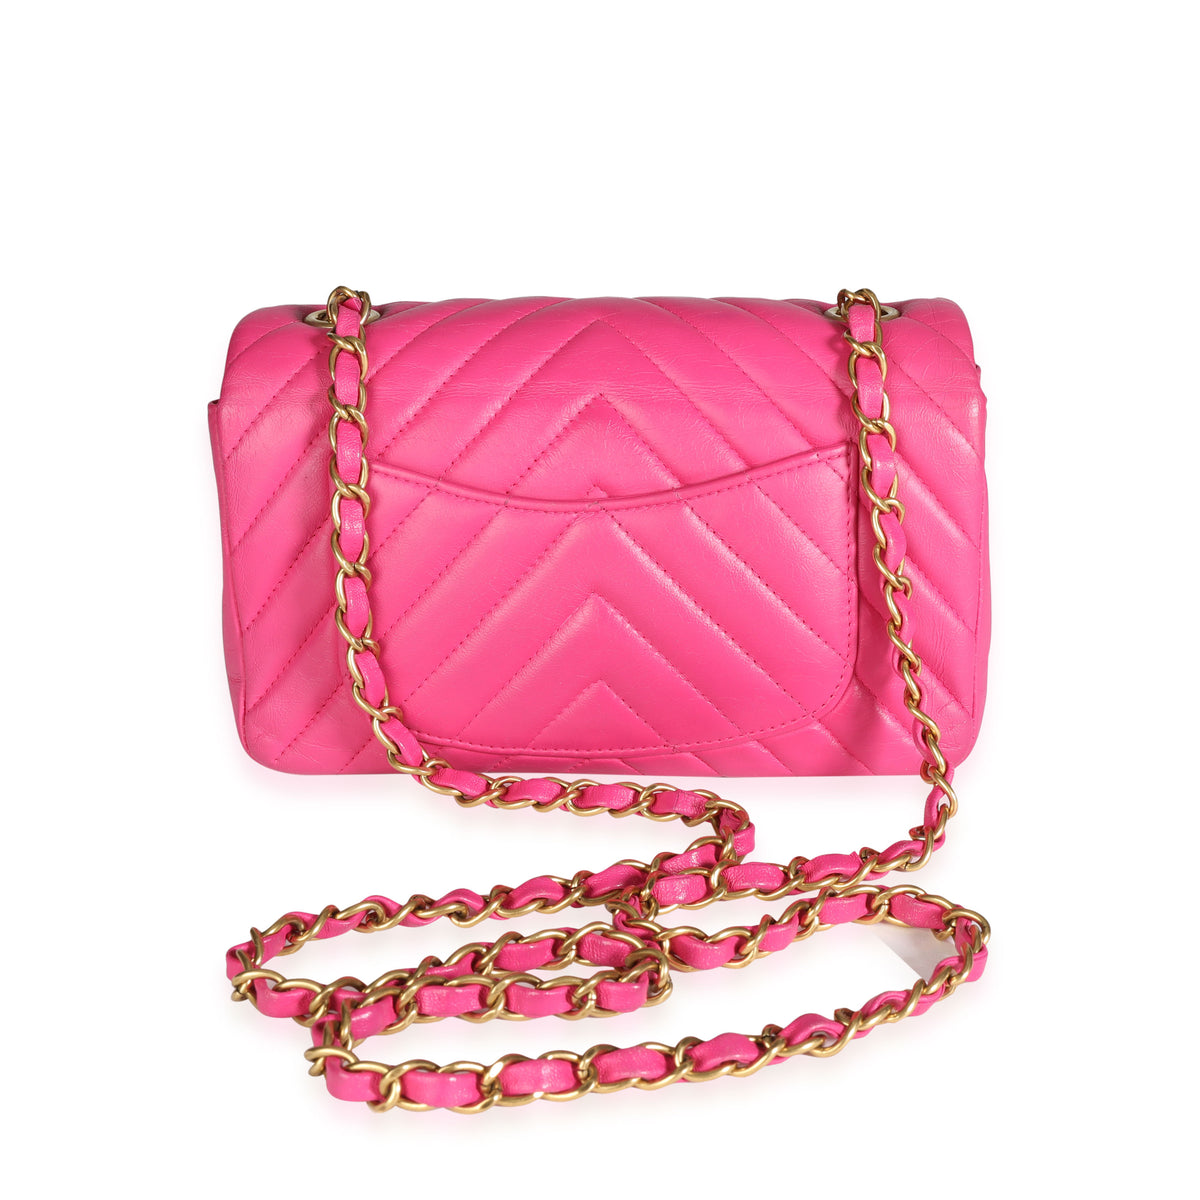 CHANEL Neon Pink Mini Top Handle Rectangular Flap Quilted Leather